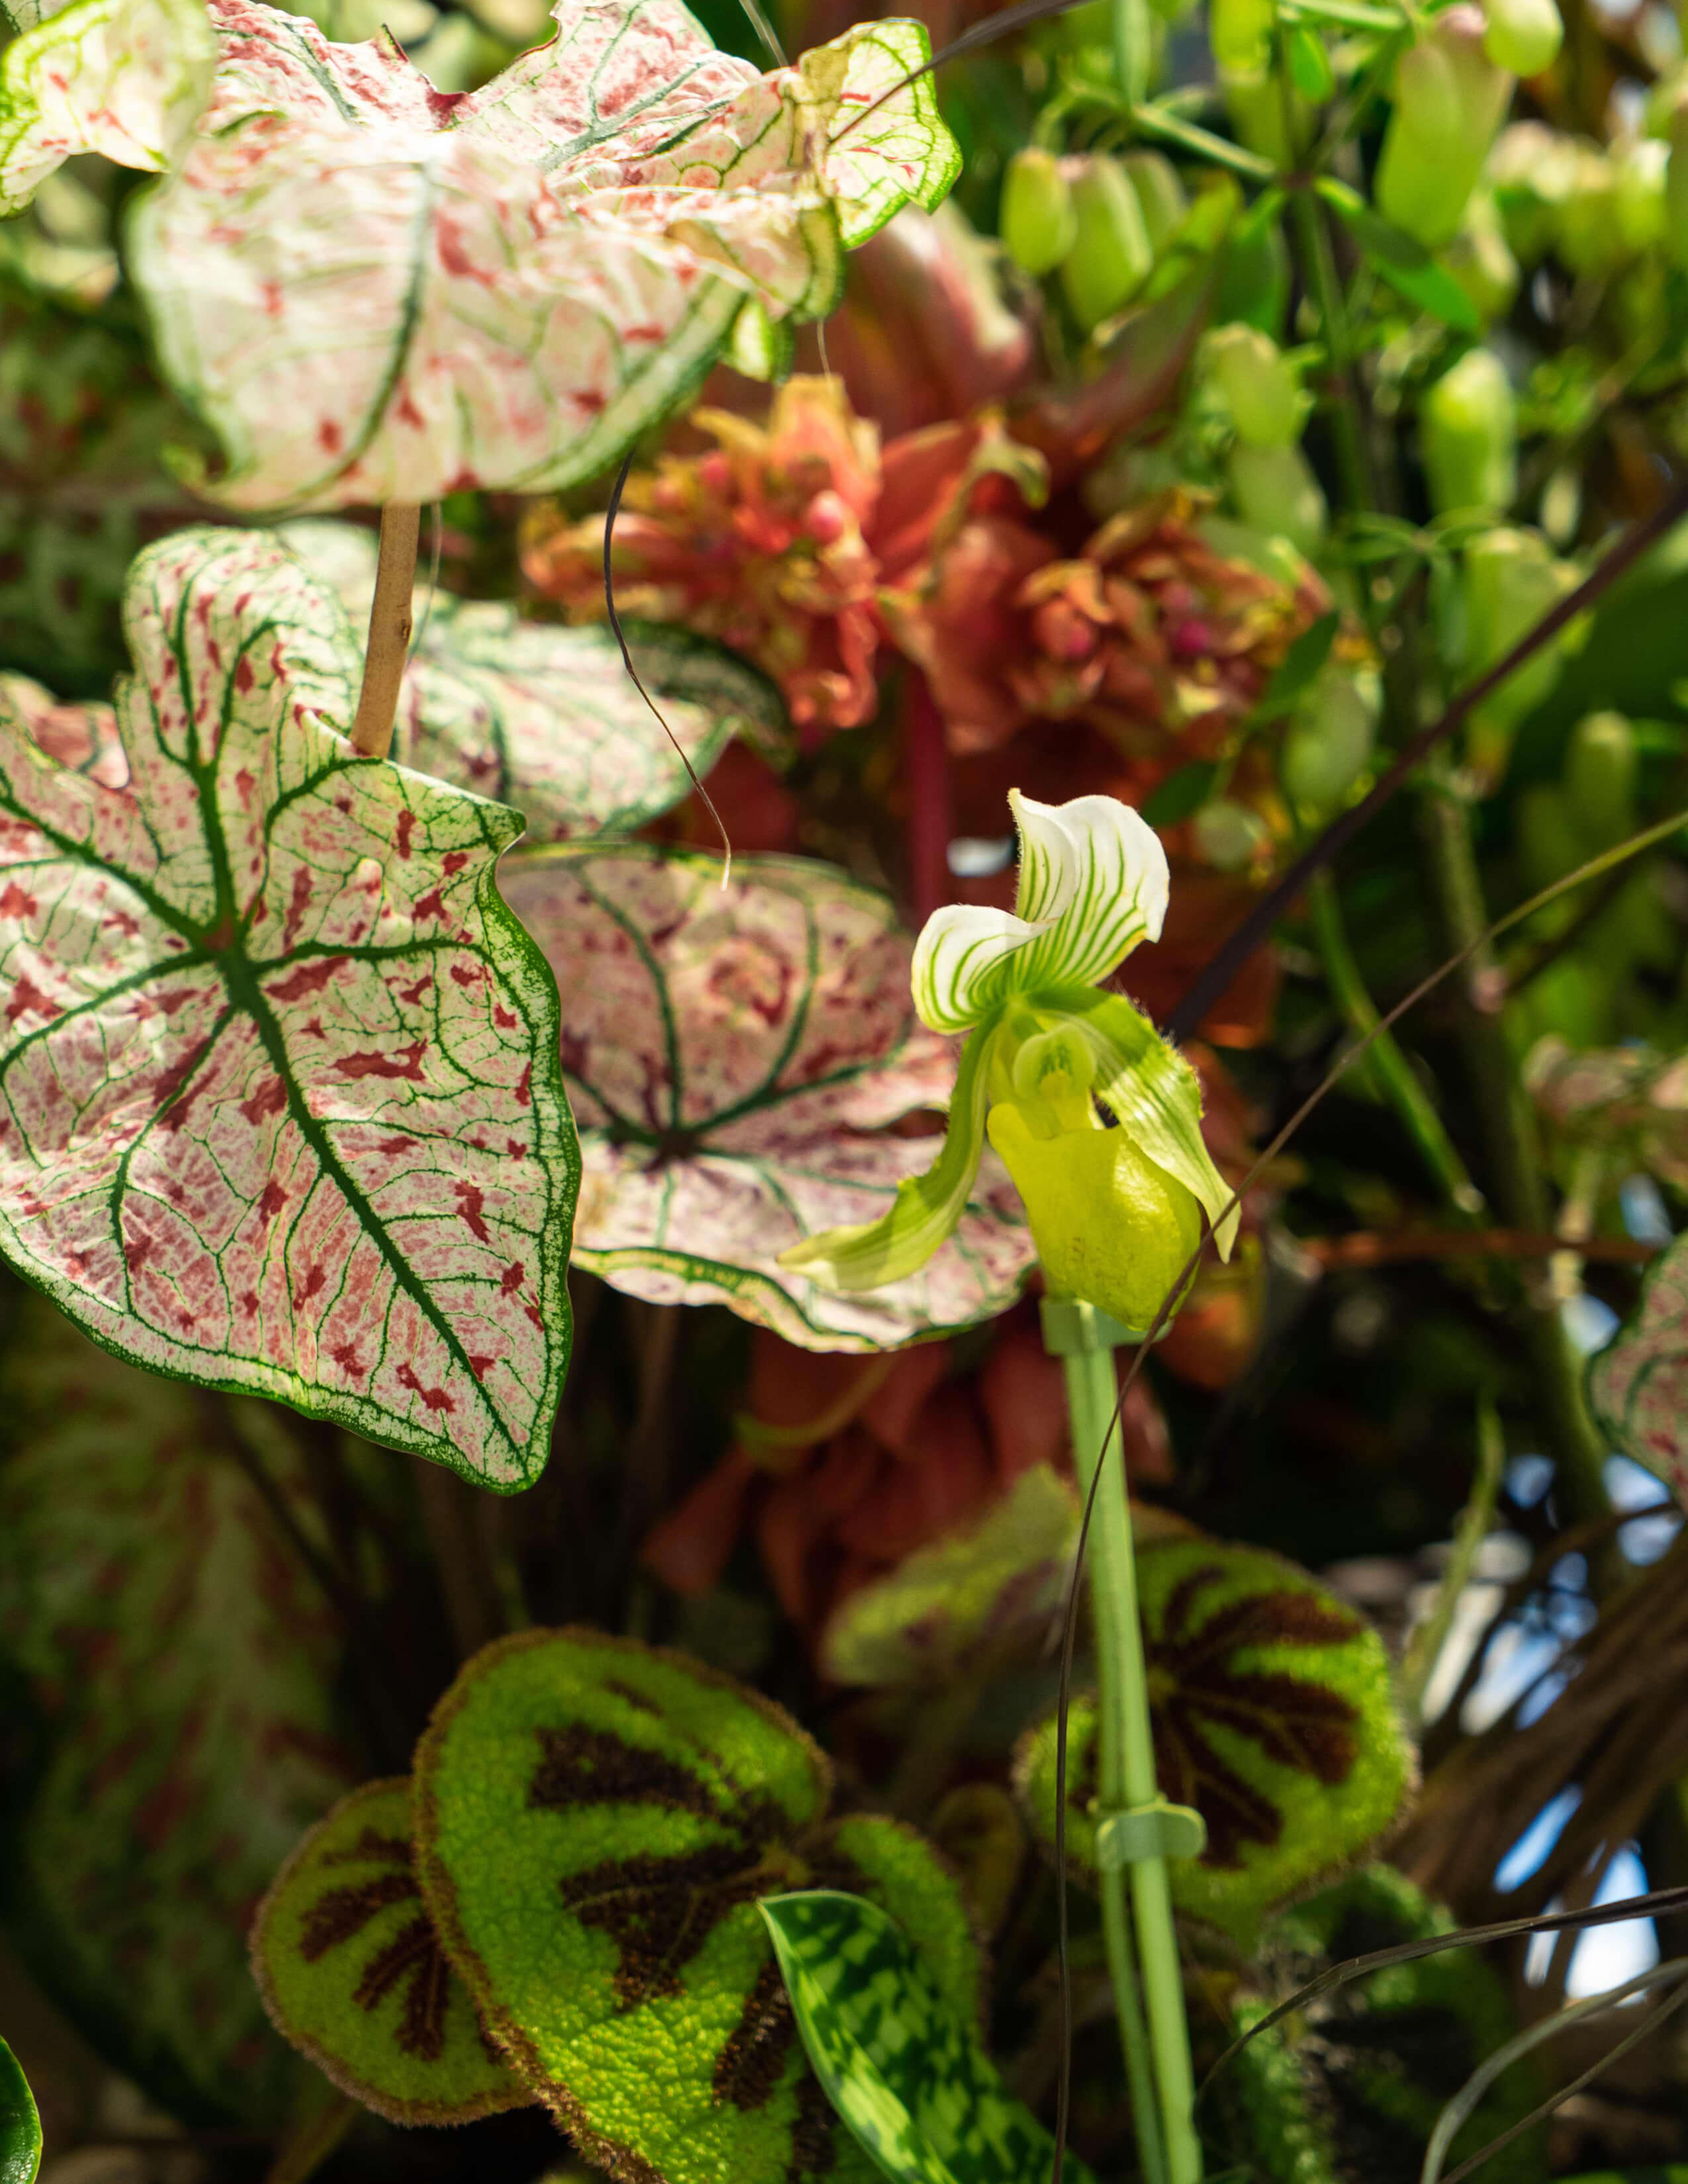 A photograph focusing on Calladiums and Paphiopedilum spicerianum while there are Begonia massoniana ‘Rock’ and Kalanchoe pinnata in the background.